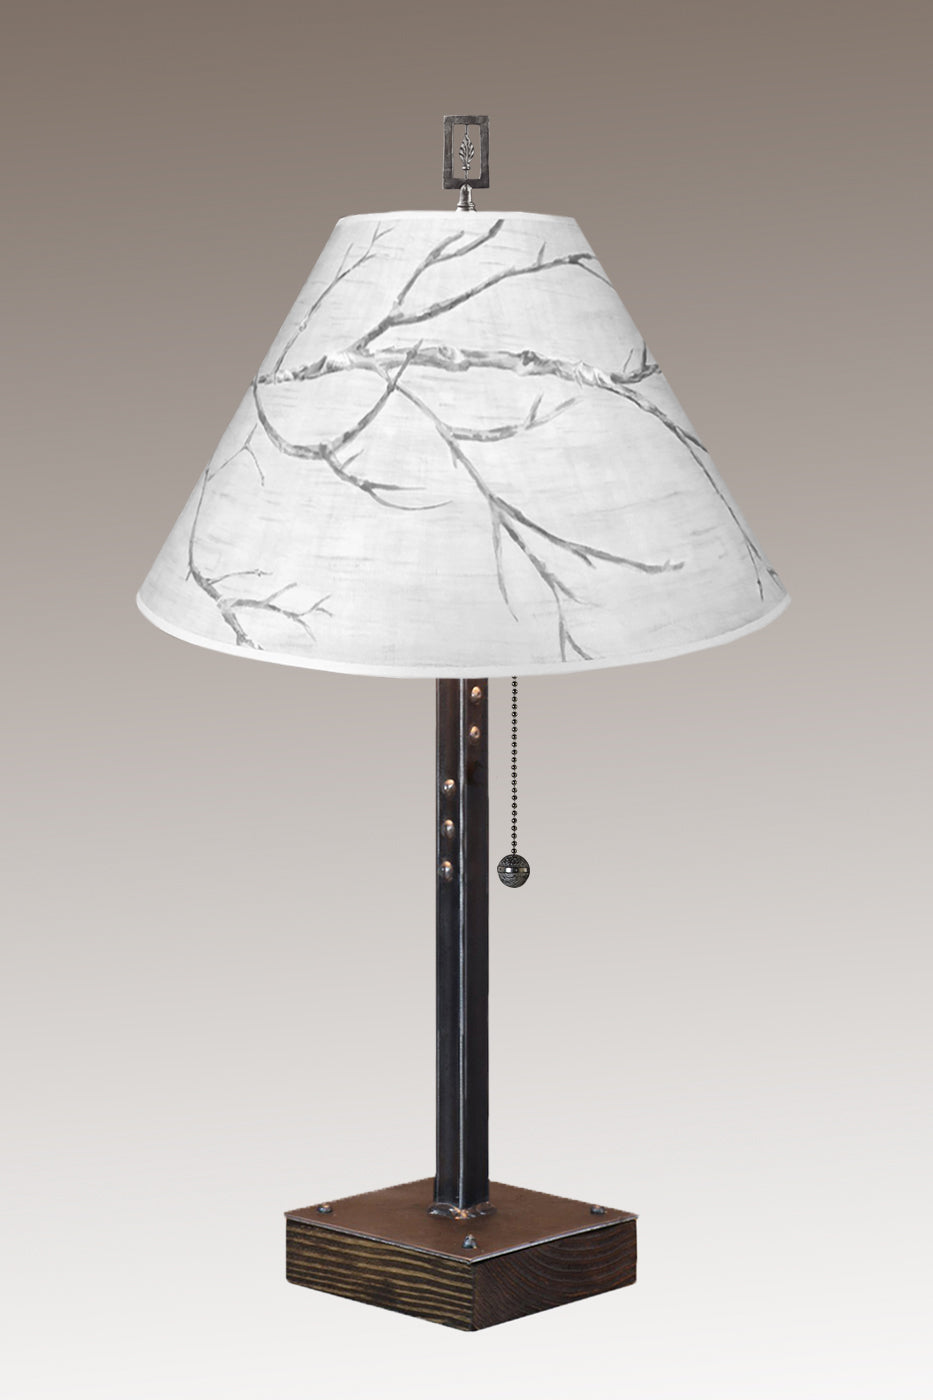 Janna Ugone & Co Table Lamps Steel Table Lamp on Wood with Medium Conical Shade in Sweeping Branch